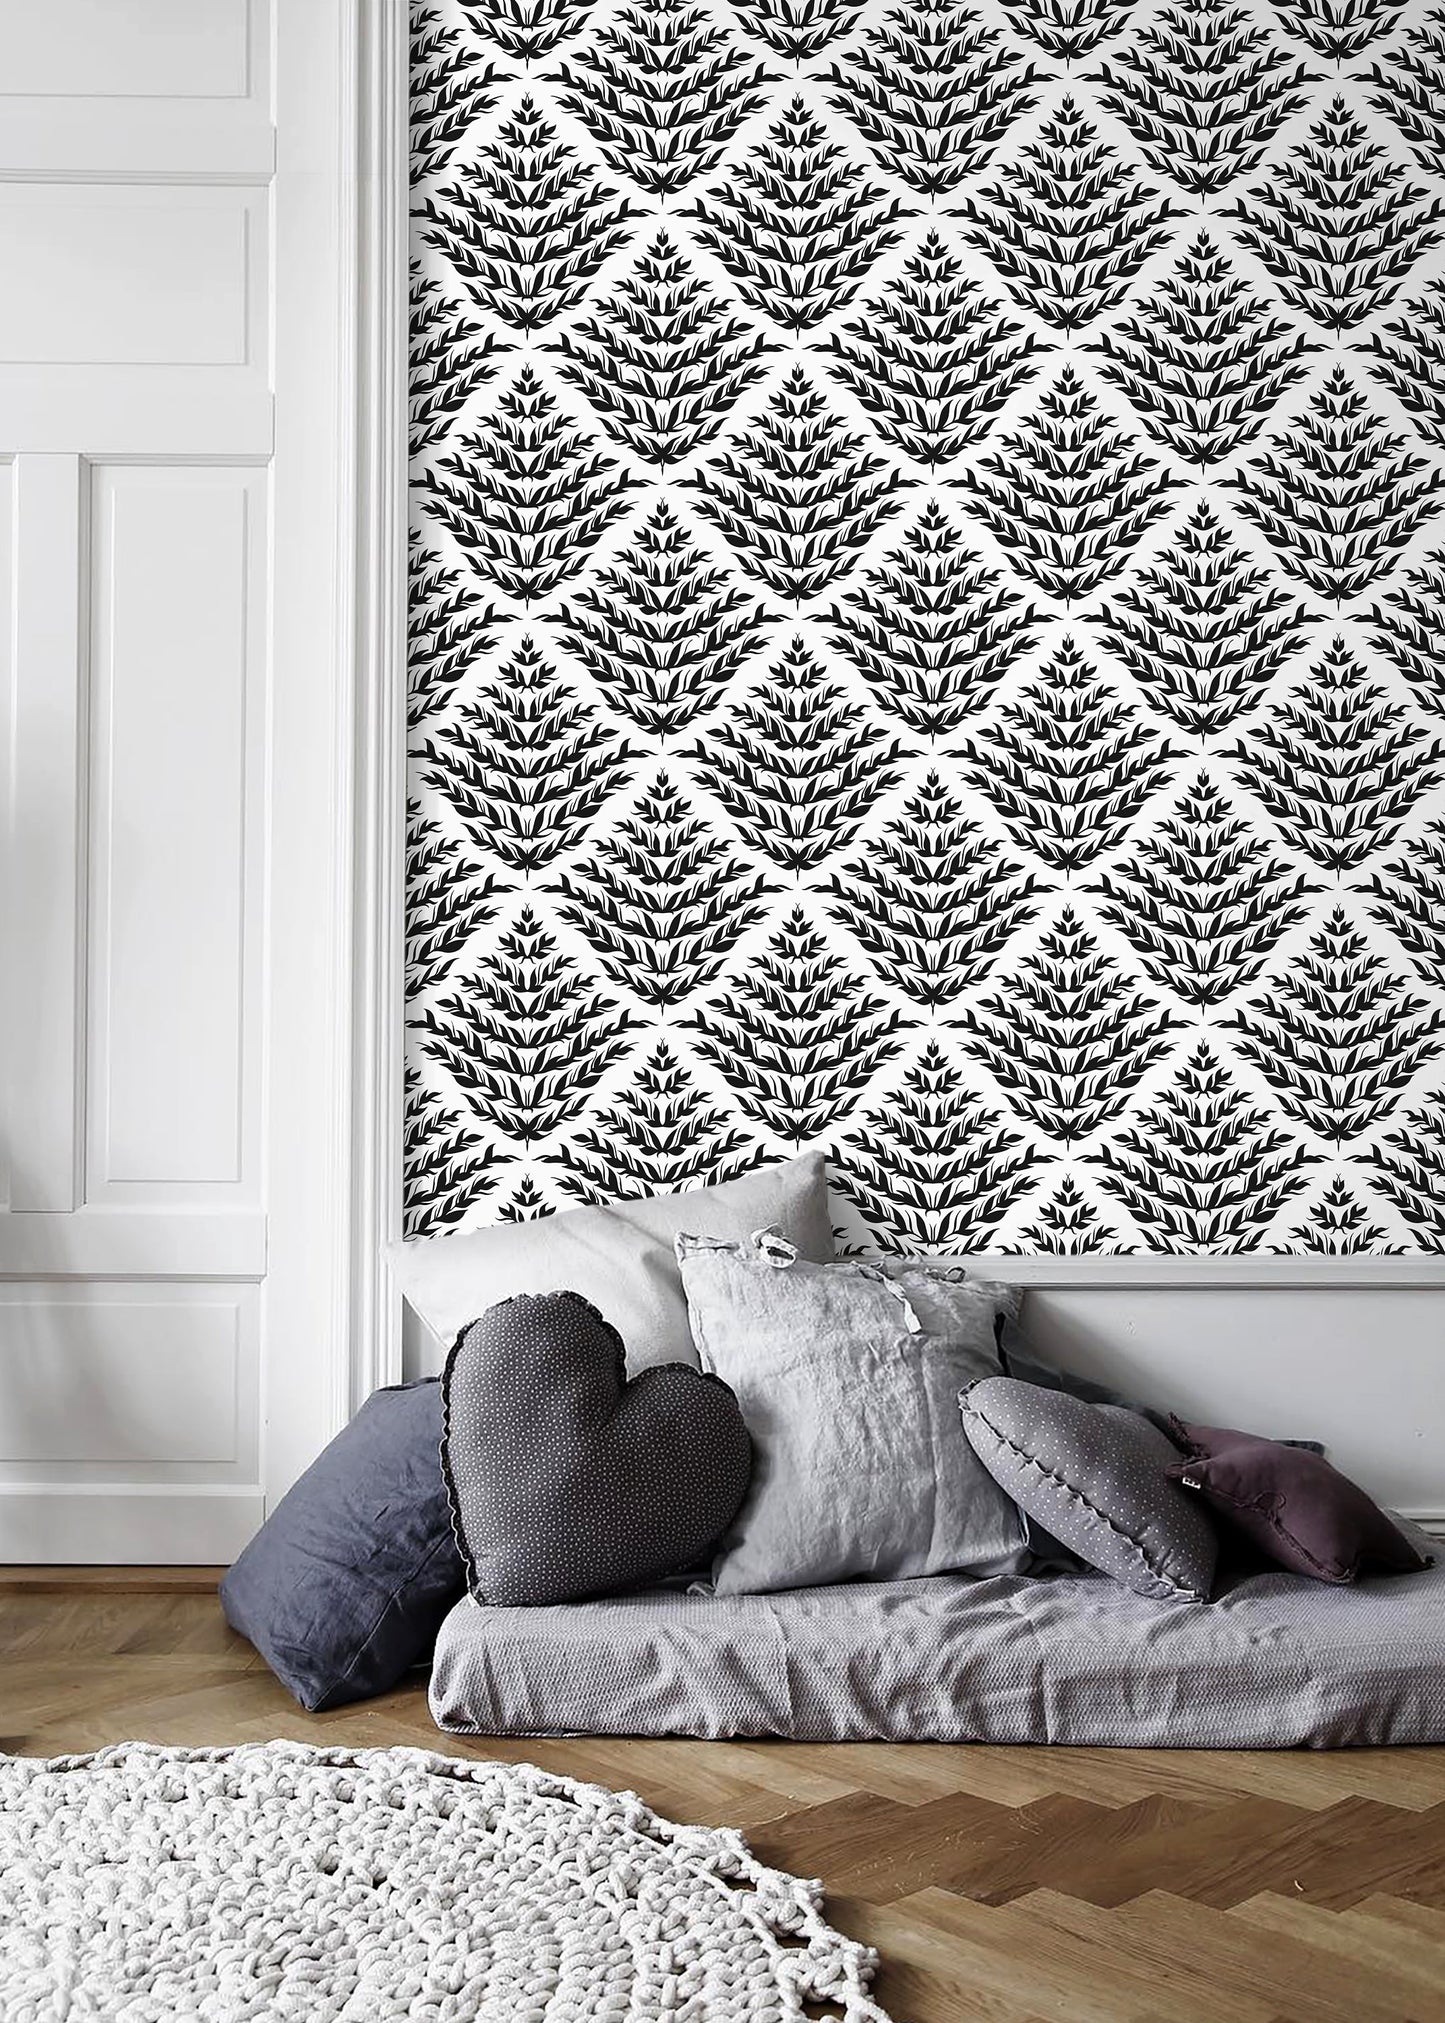 Black and White Leaf Wallpaper / Peel and Stick Wallpaper Removable Wallpaper Home Decor Wall Art Wall Decor Room Decor - C856